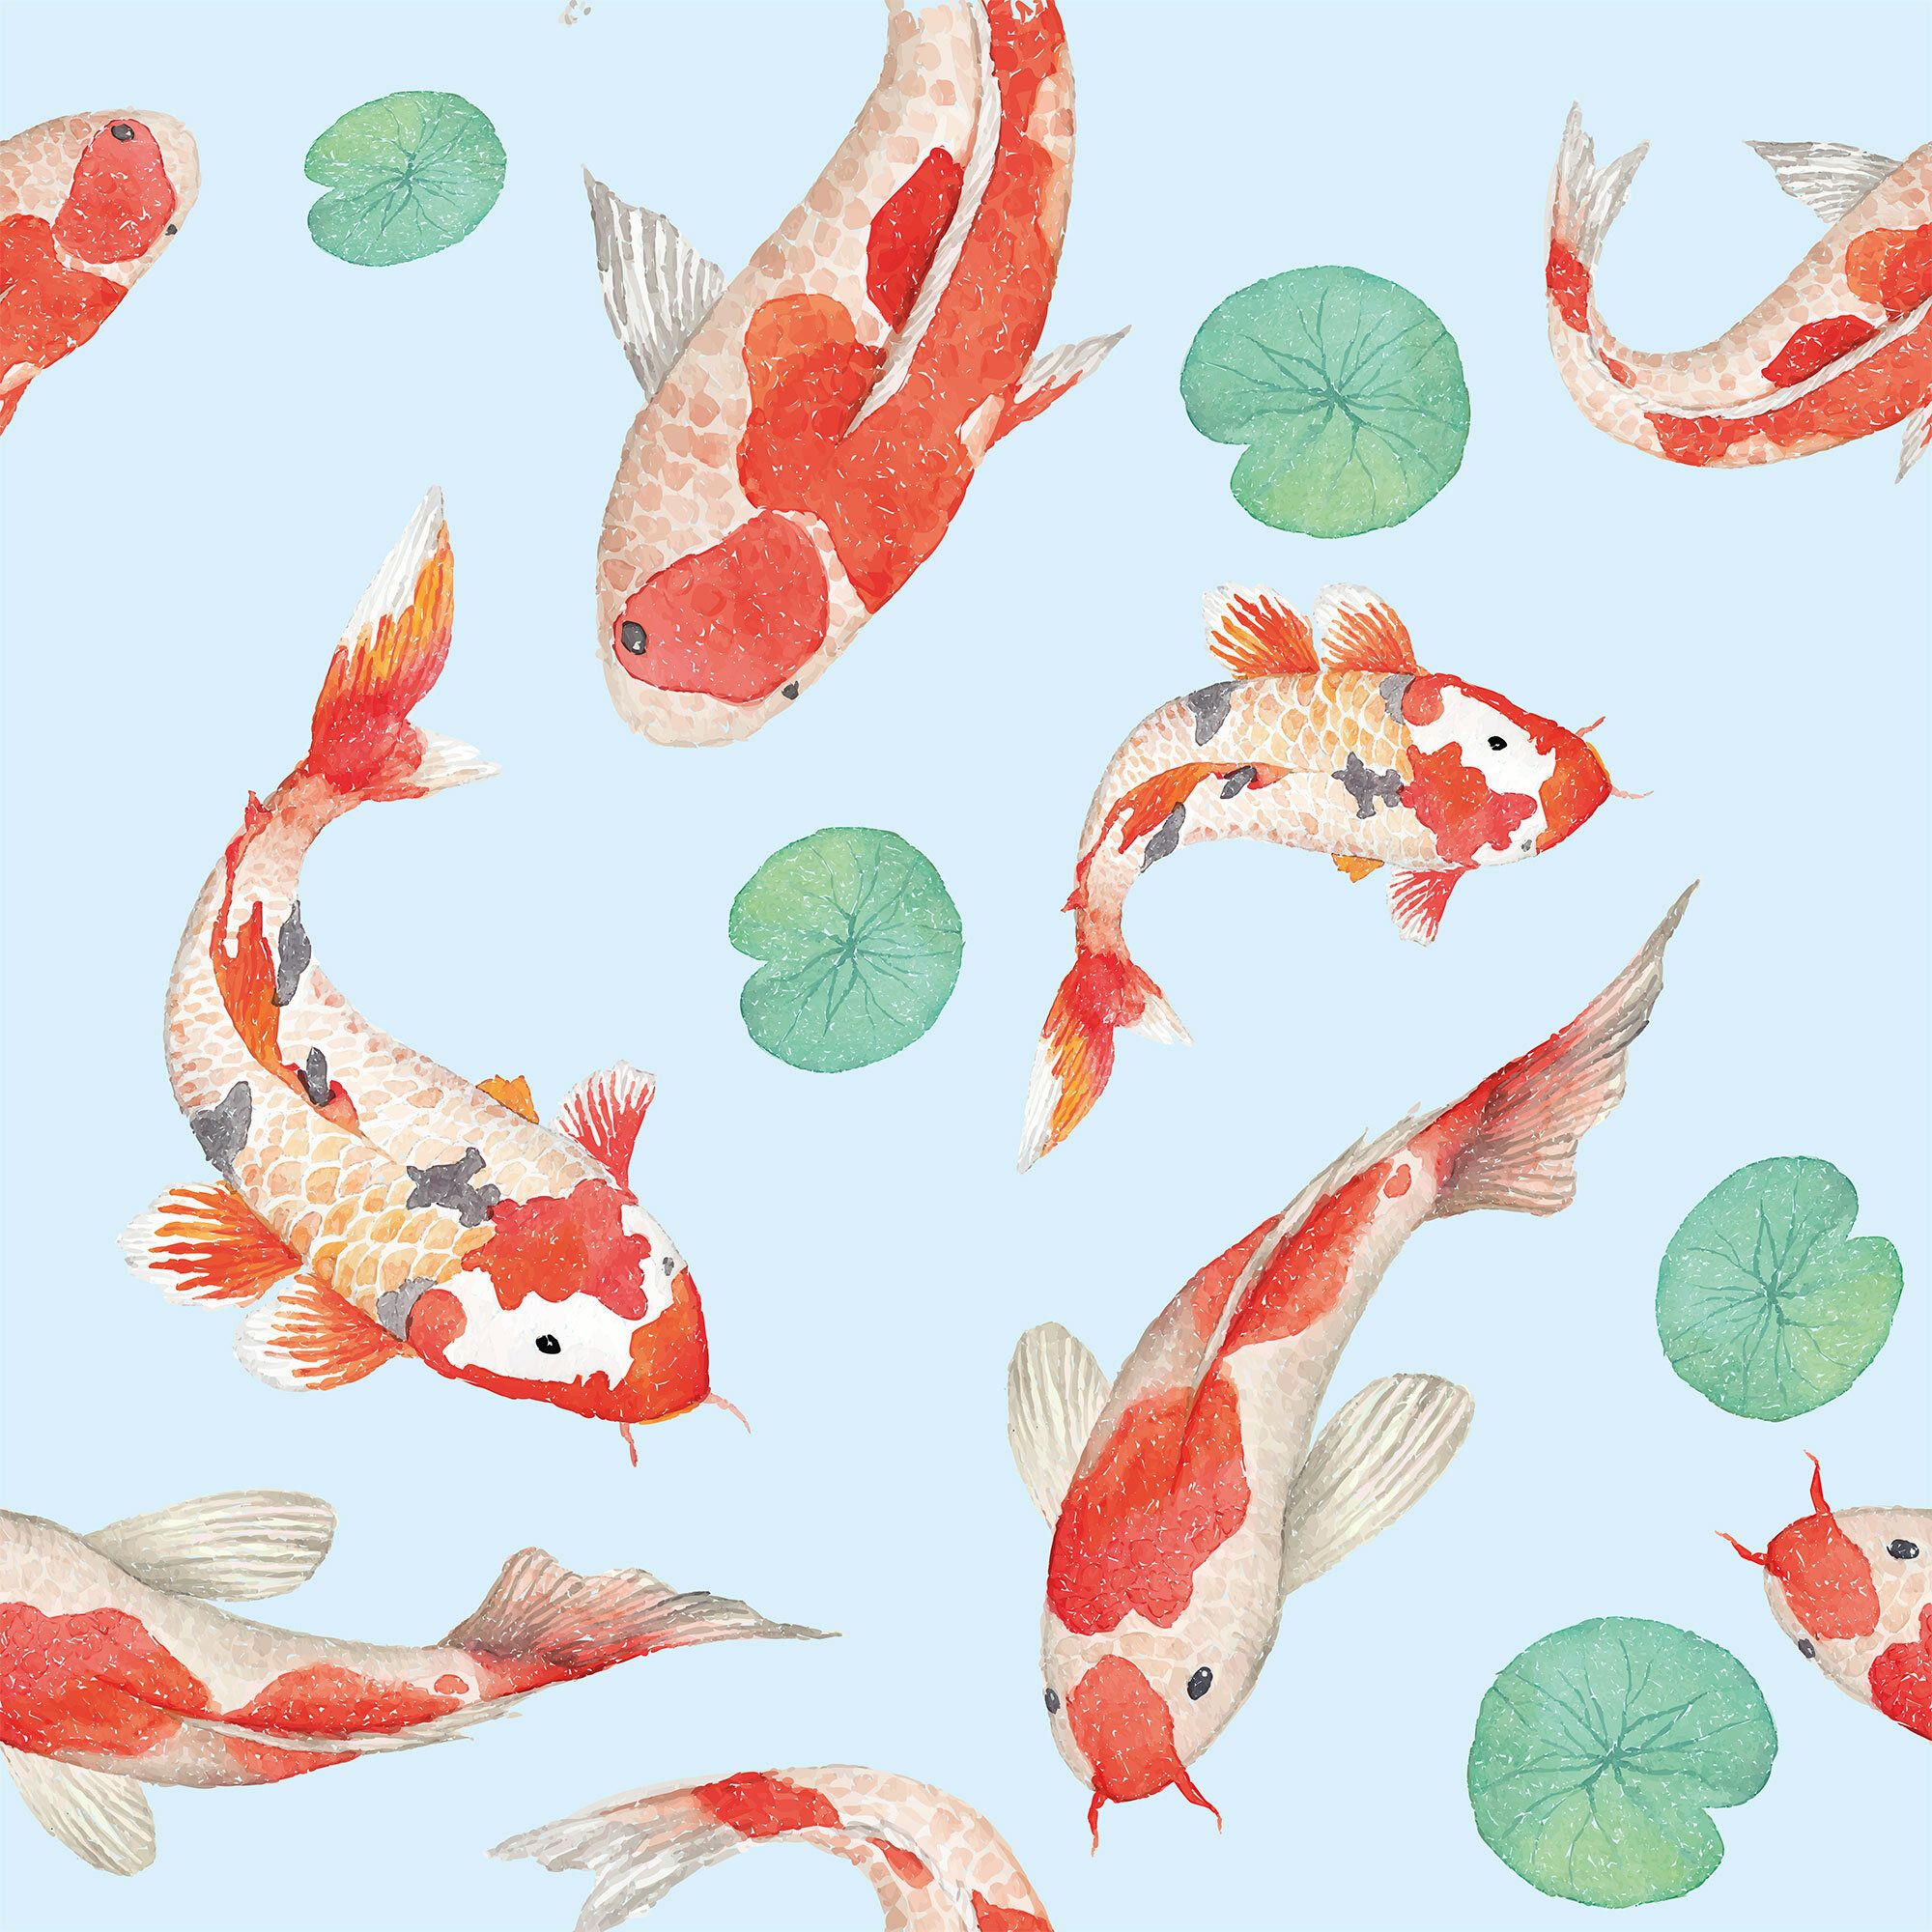 A watercolor painting of koi fish and lily pads on a blue background - Koi fish